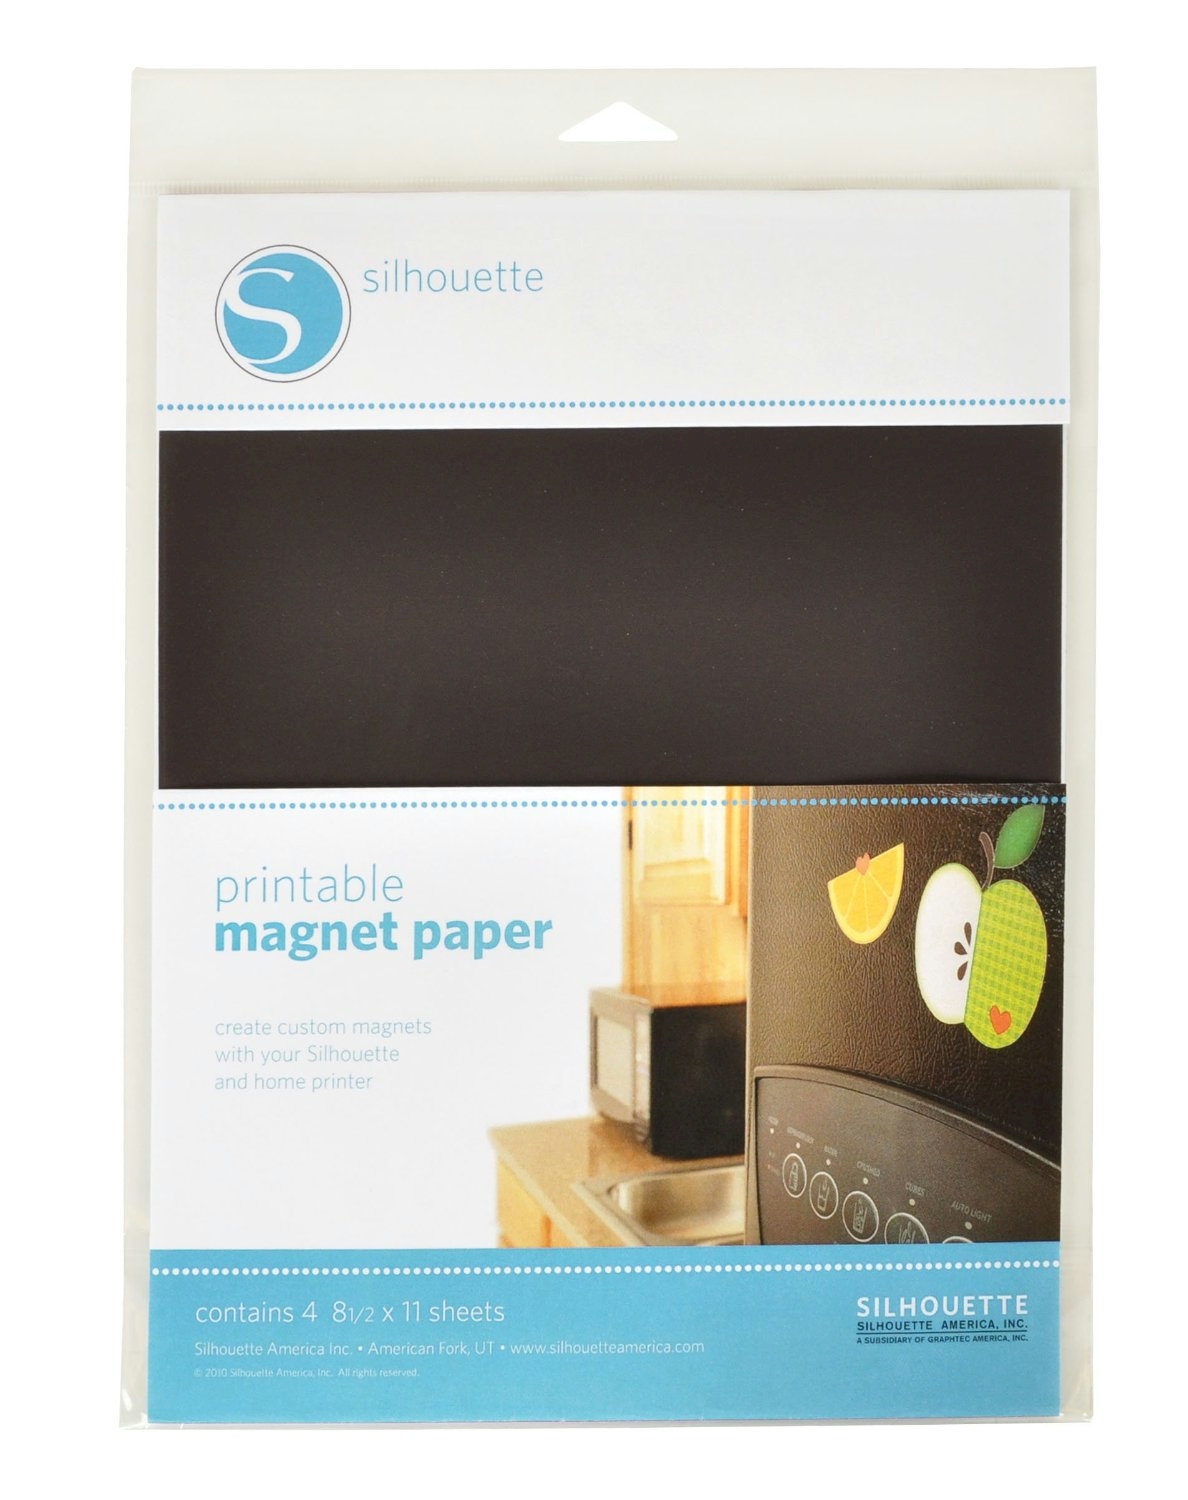 Silhouette Printable Magnet 8.5" x 11" Paper - 4 Sheets - CLOSEOUT